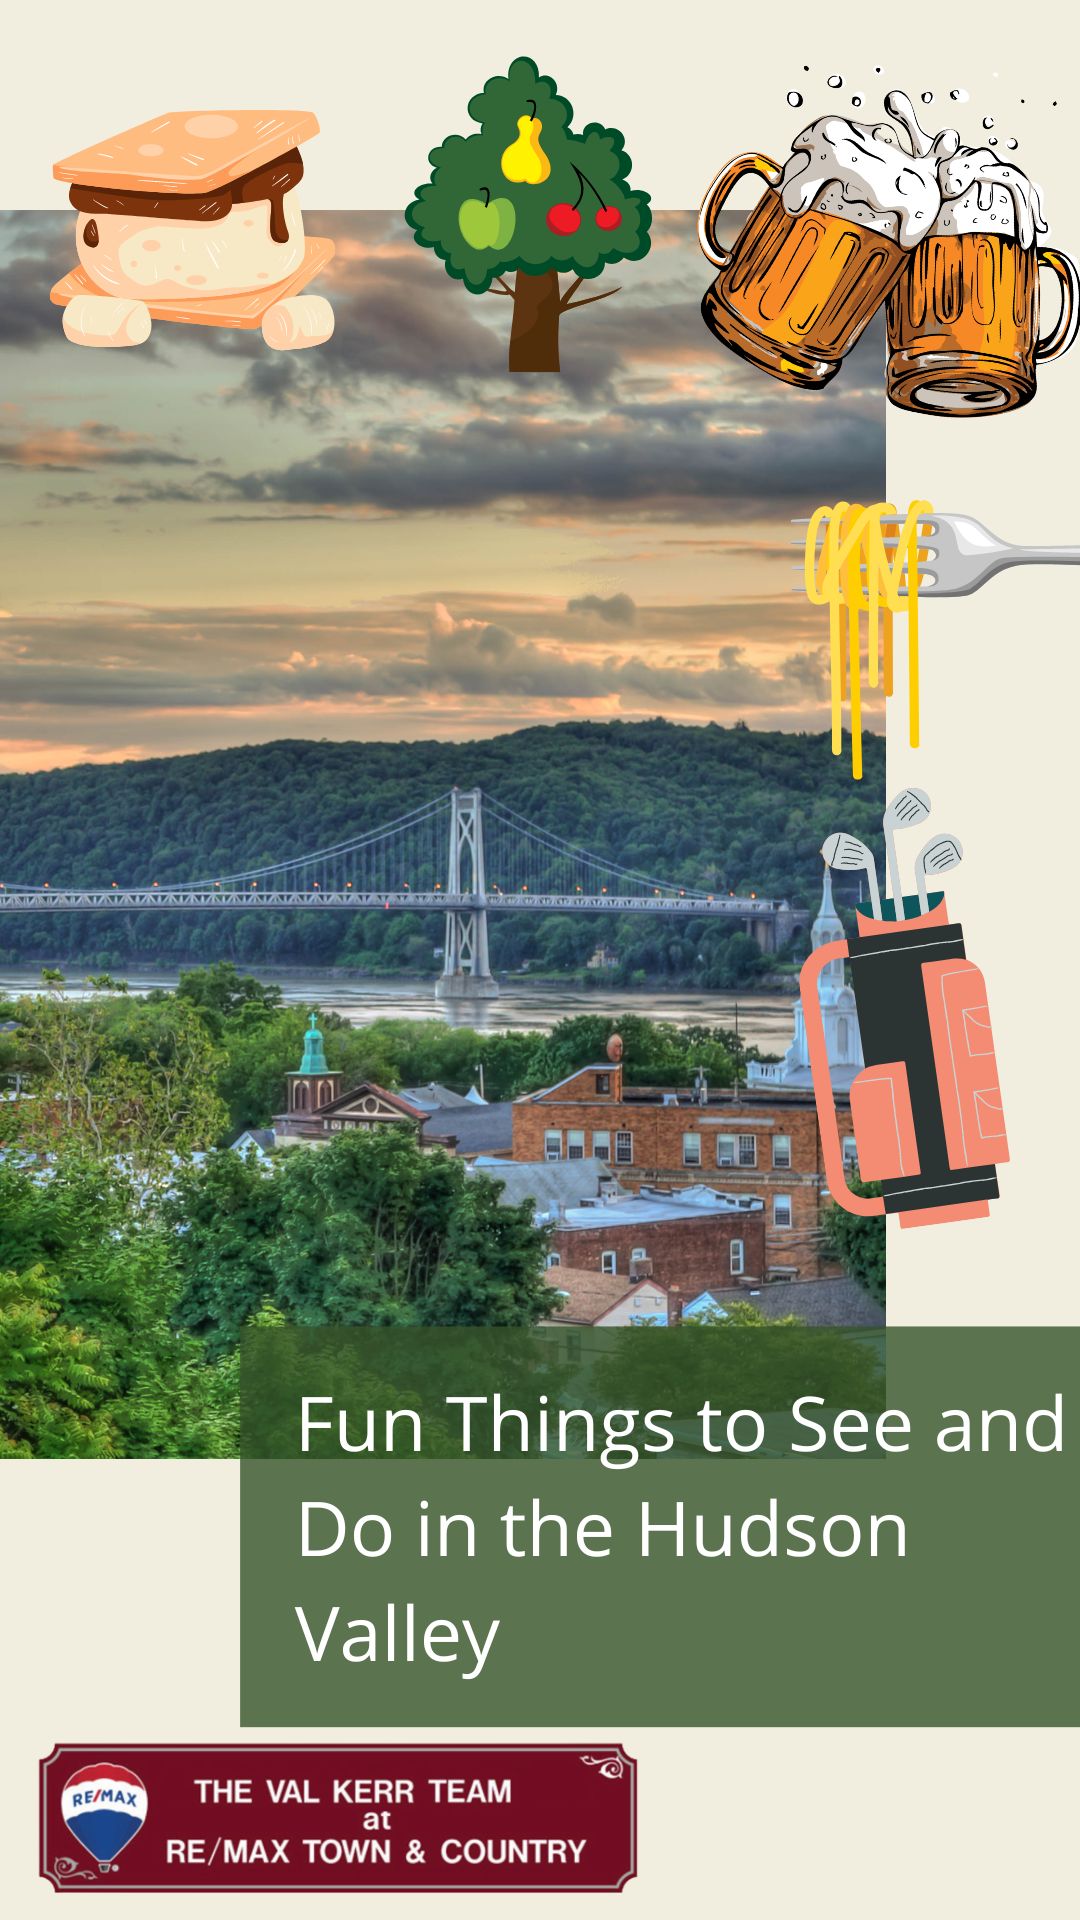 Fun Things to See and Do in the Hudson Valley